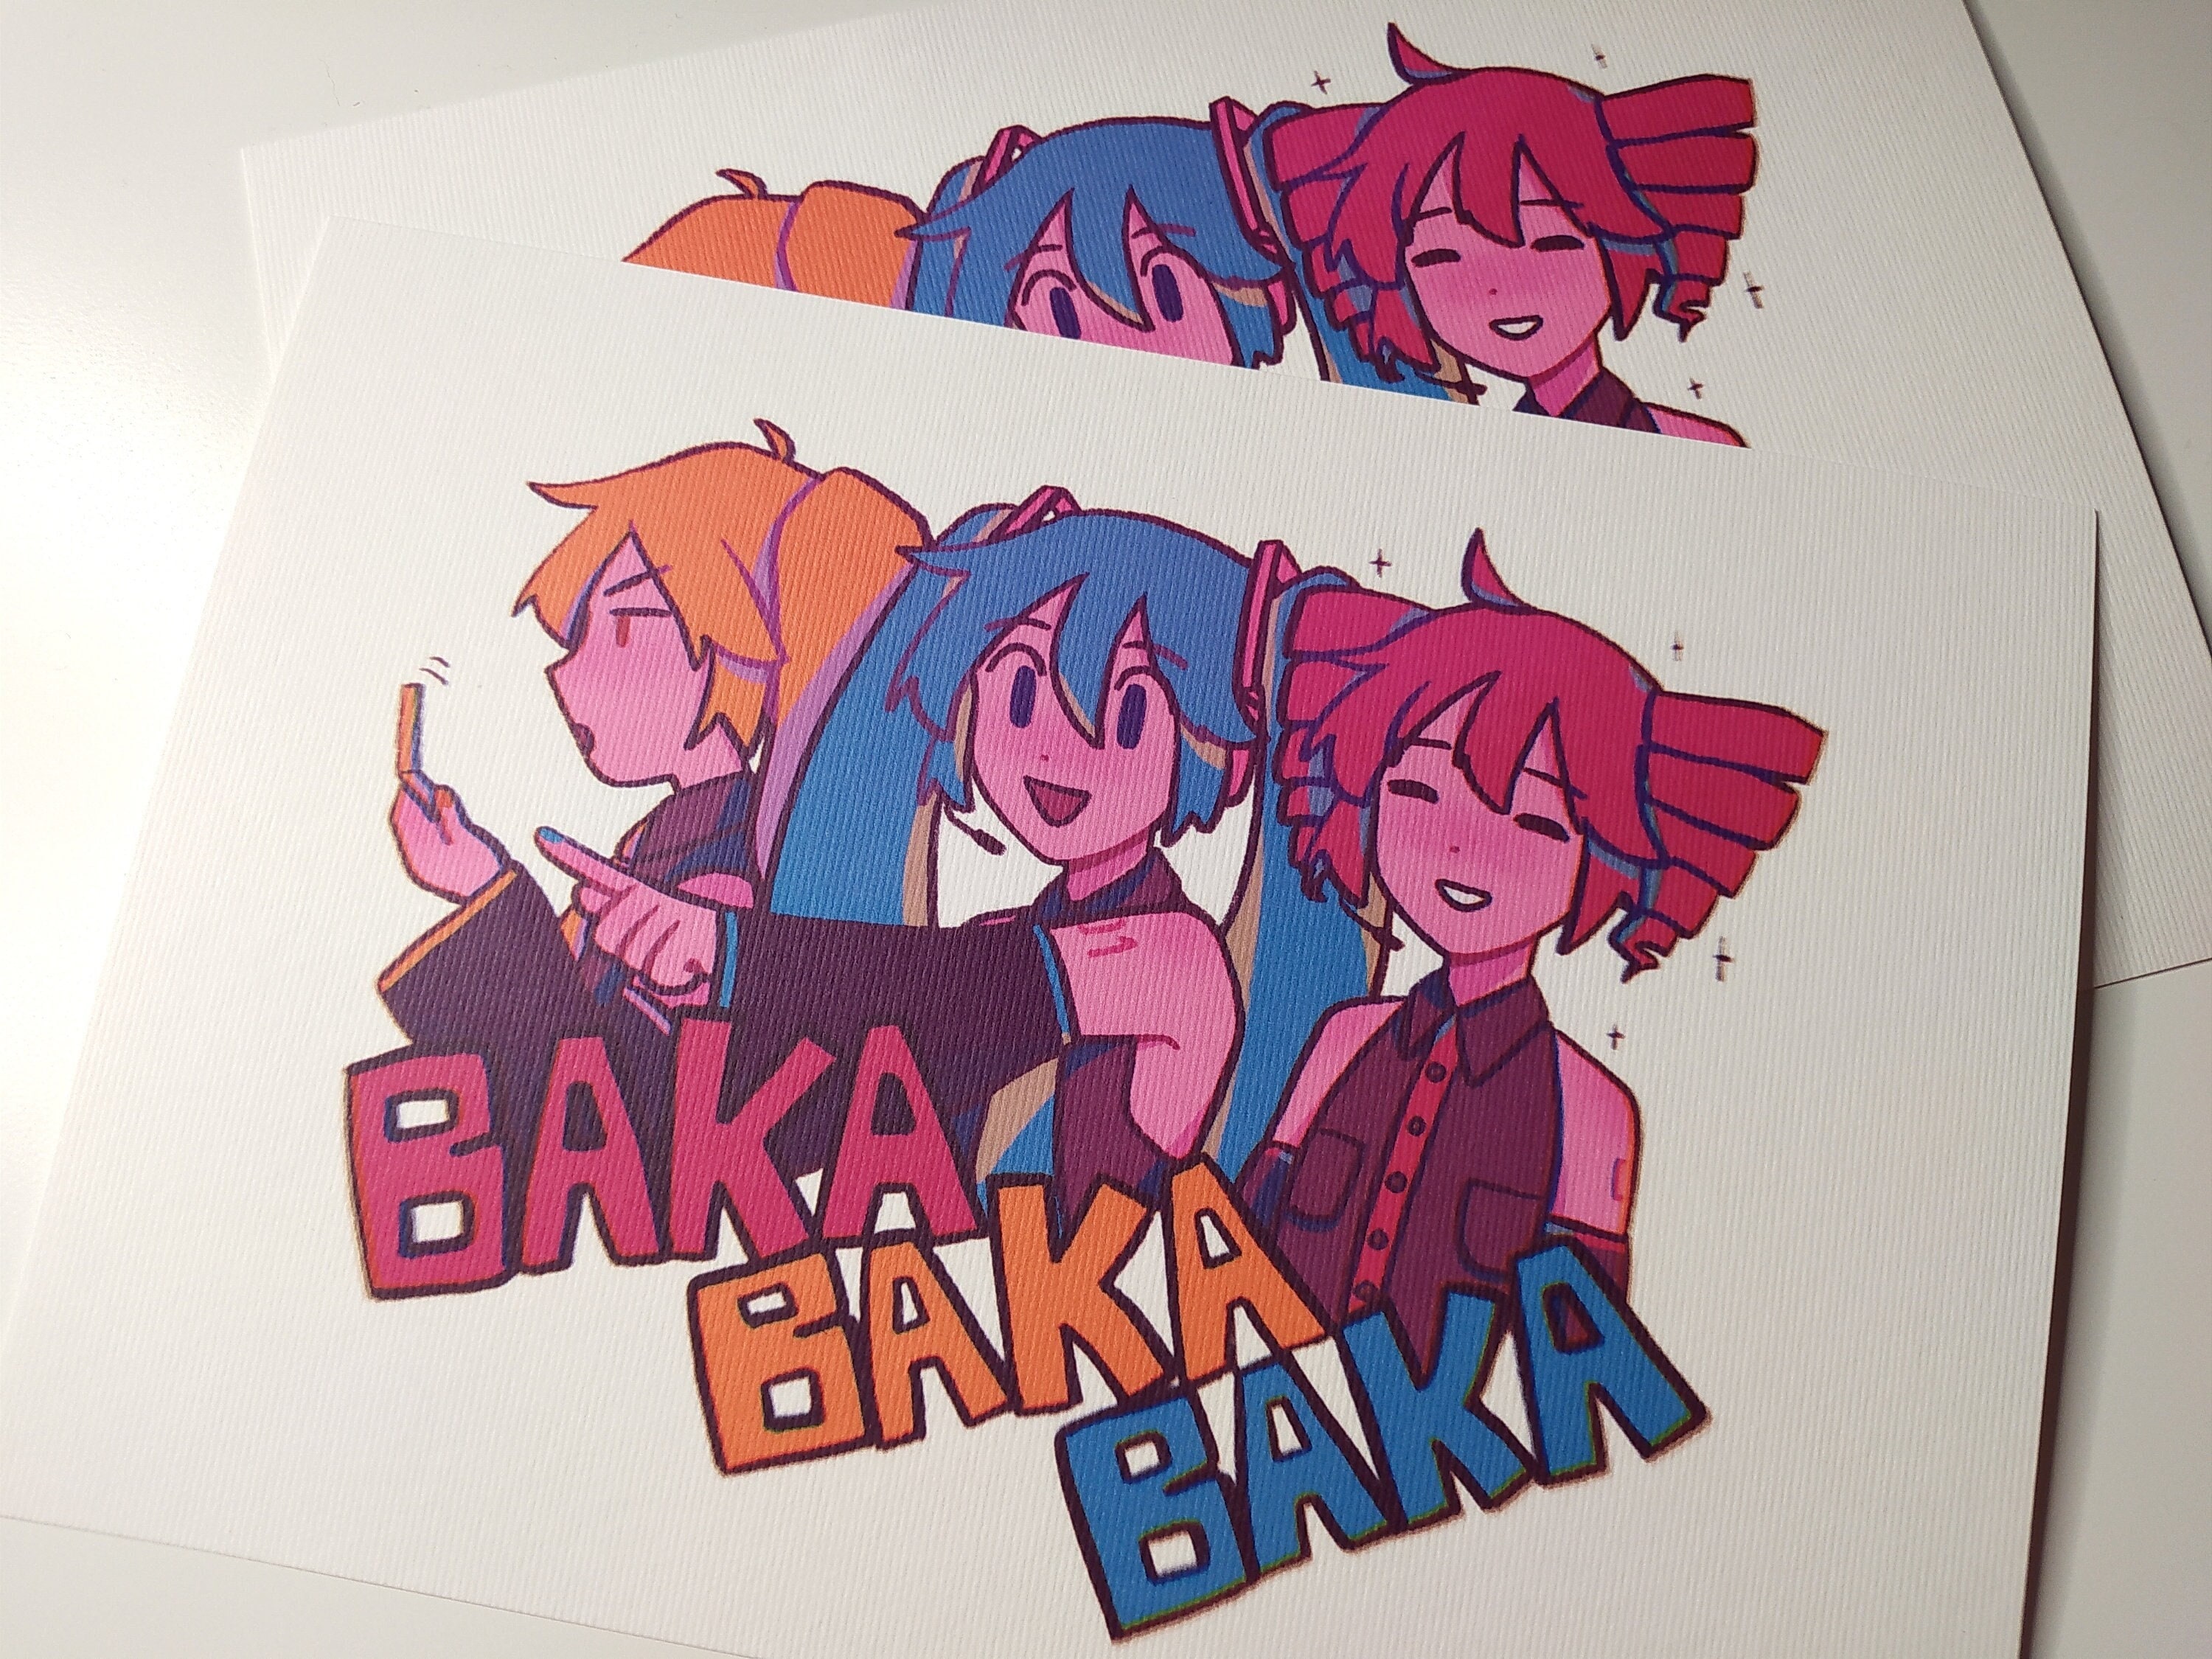 Vocaloid Triple Baka Chibis Poster for Sale by c10884